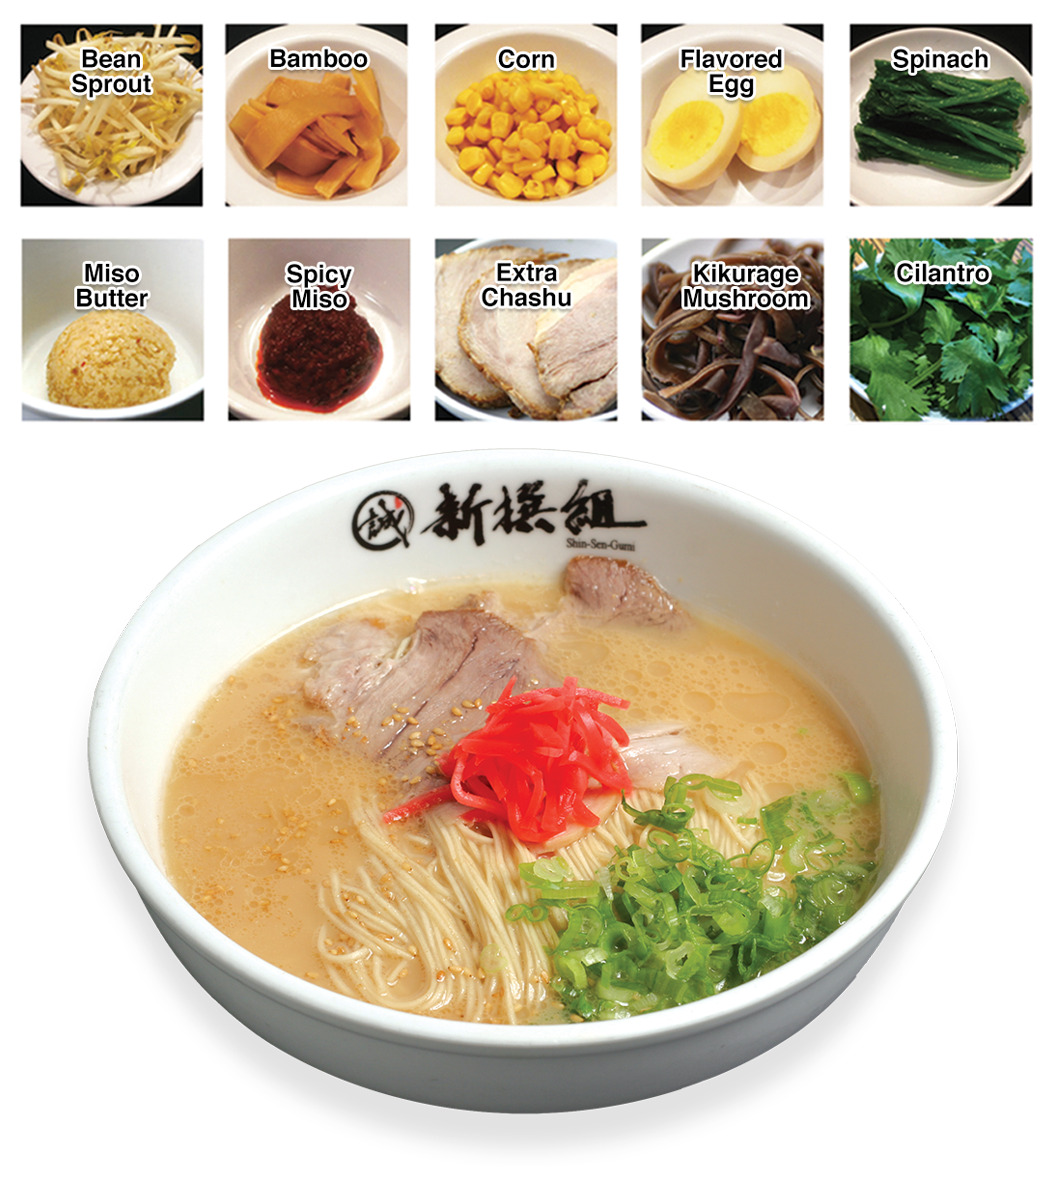 Photo of Ramen Toppings: 1. Bean sprout, 2. Bamboo, 3. Corn, 4. Hard Boiled Flavored Egg, 5. Spinach, 6. Miso Butter, 7. Spicy Miso, 8. Extra Chashu Pork, 9. Kikurage mushroom and 10. Cilantro.